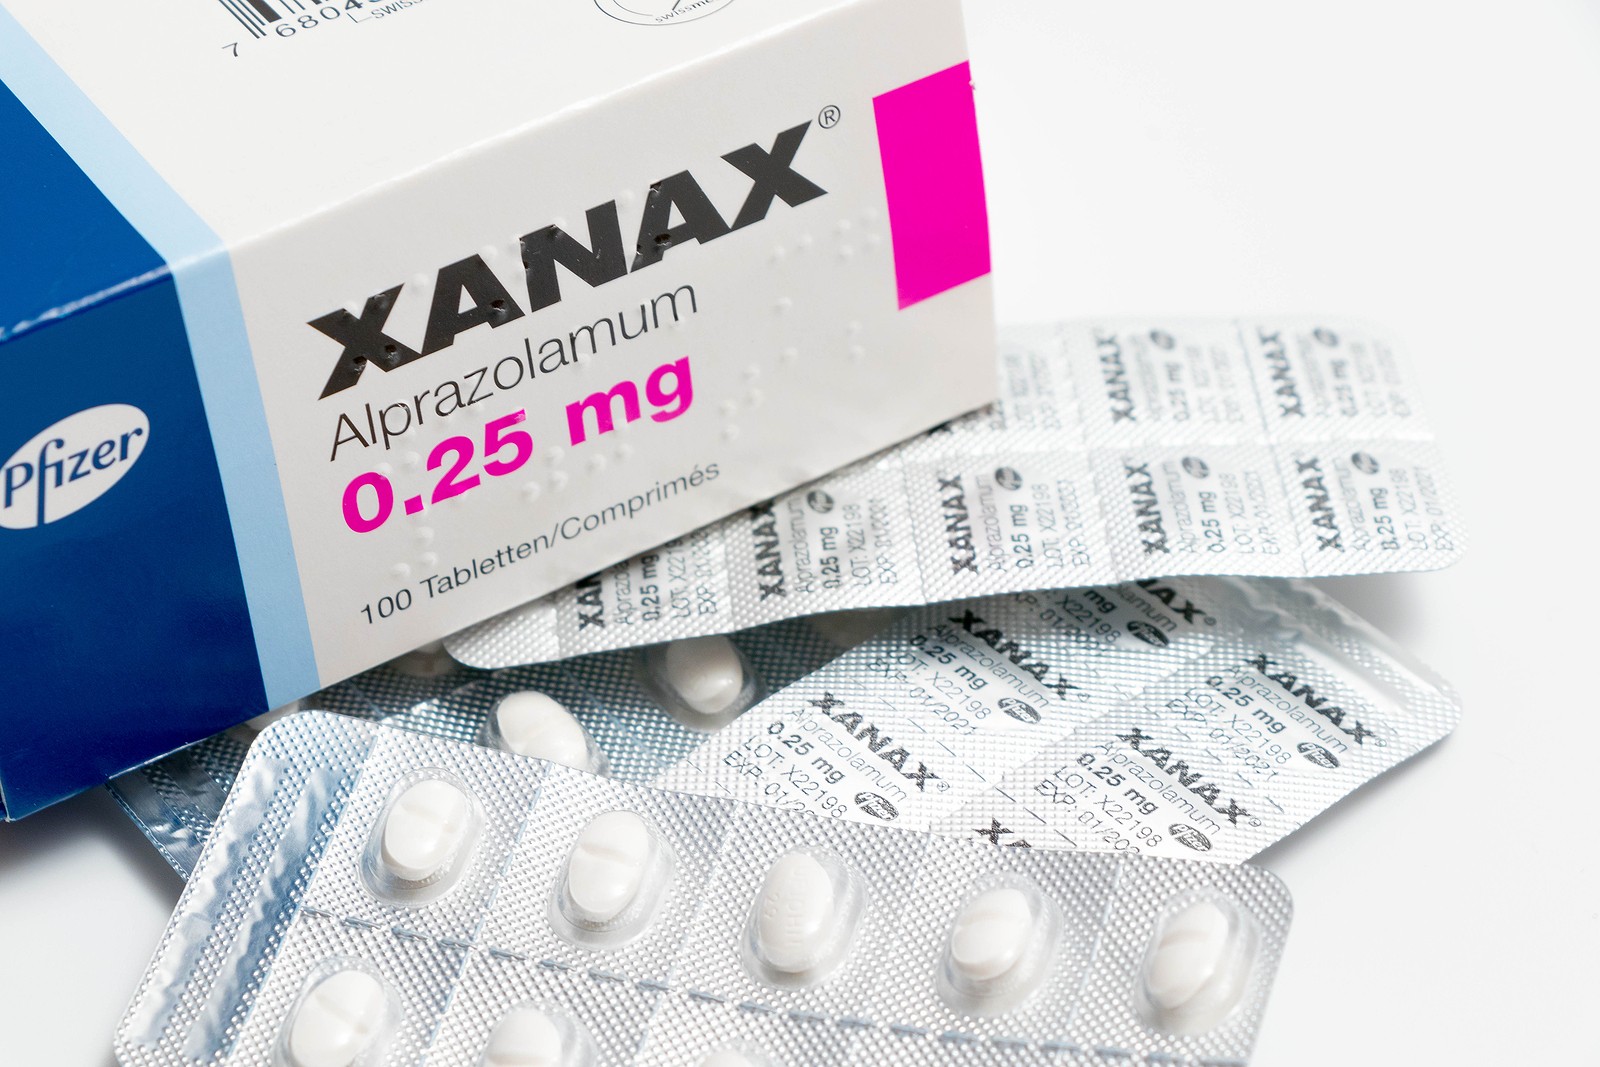 Xanax pills and packaging.